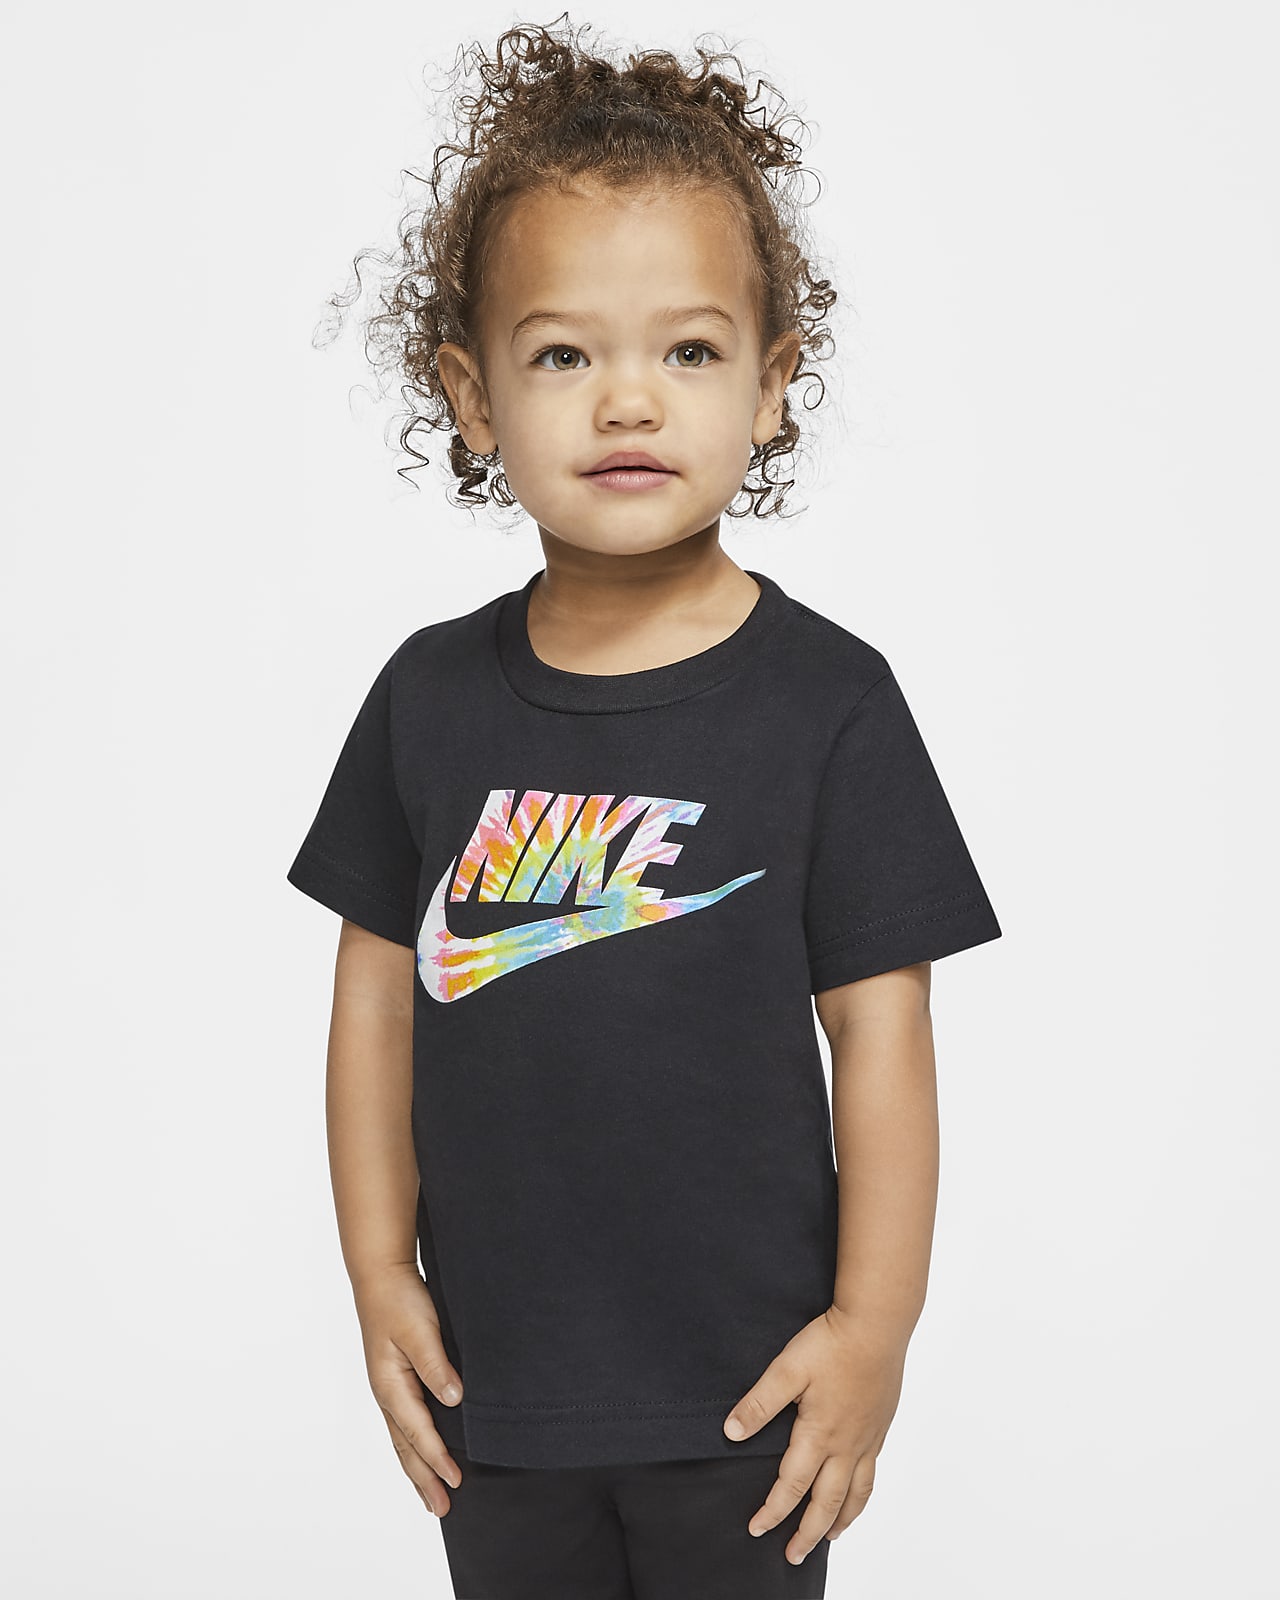 2t nike clothes